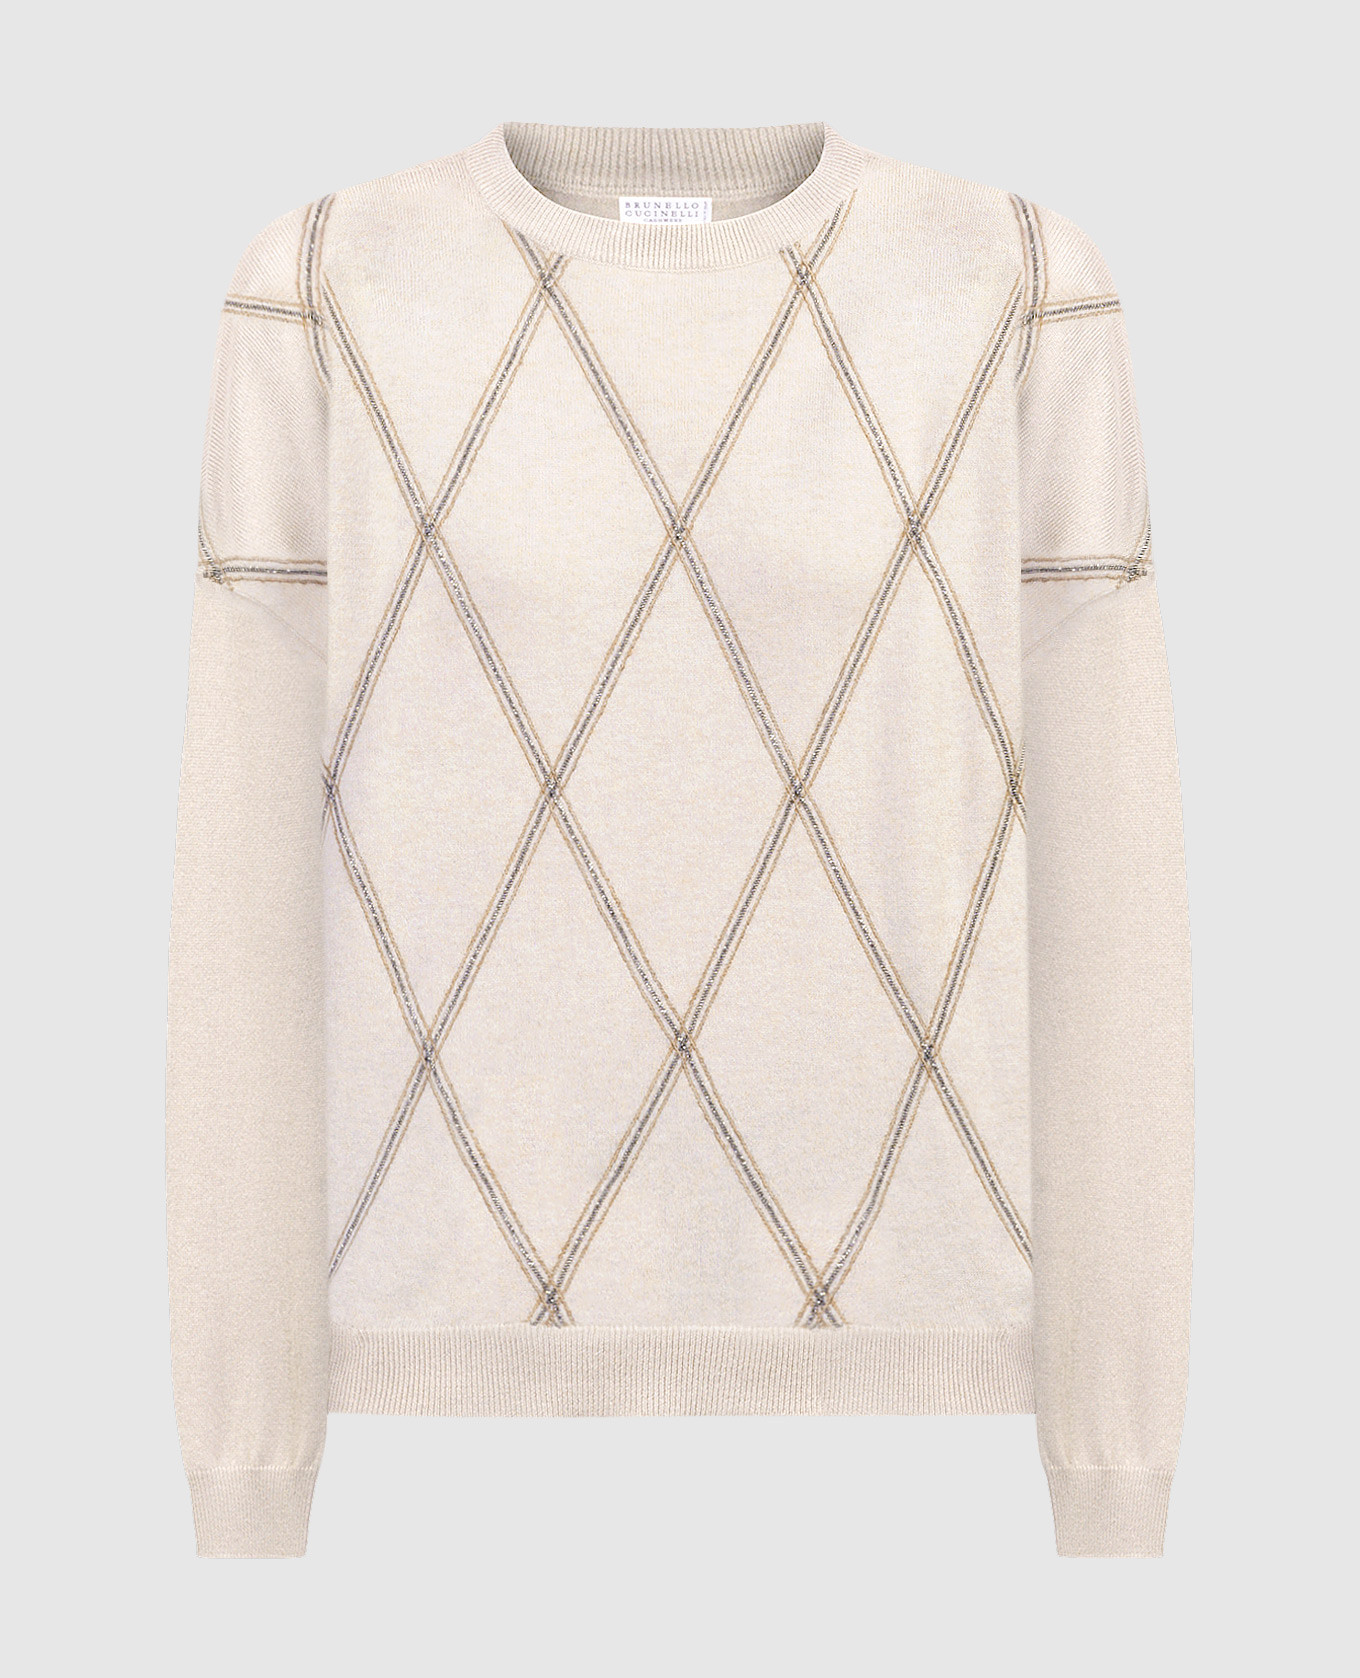 Beige wool, cashmere and silk jumper in a geometric pattern with a monil chain